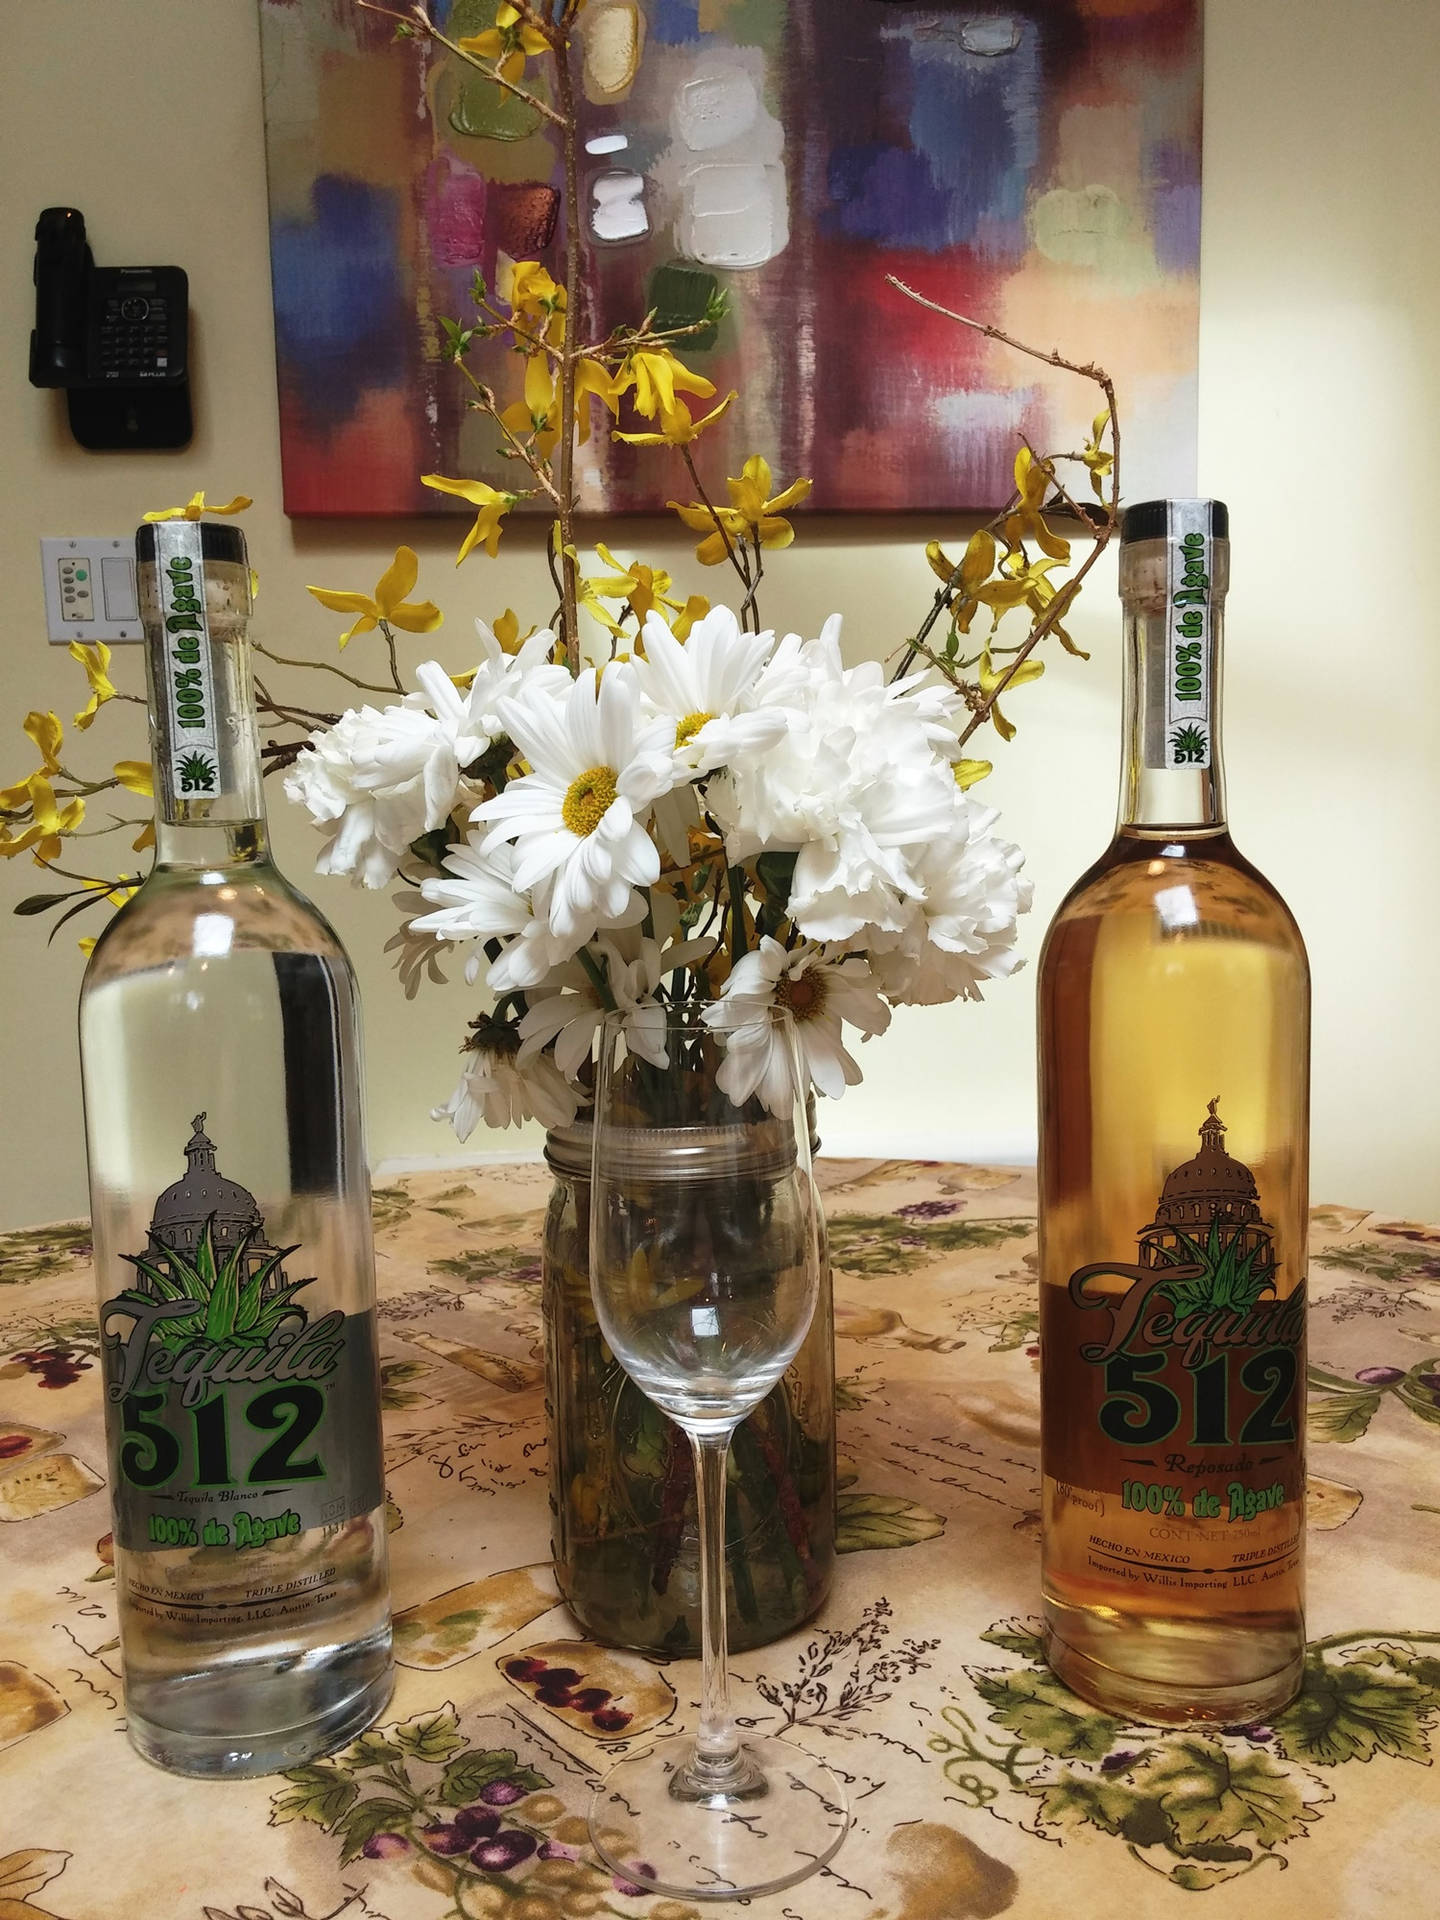 Elegant Bottle of Tequila 512 with Distinctive Grey and Yellow Label Wallpaper